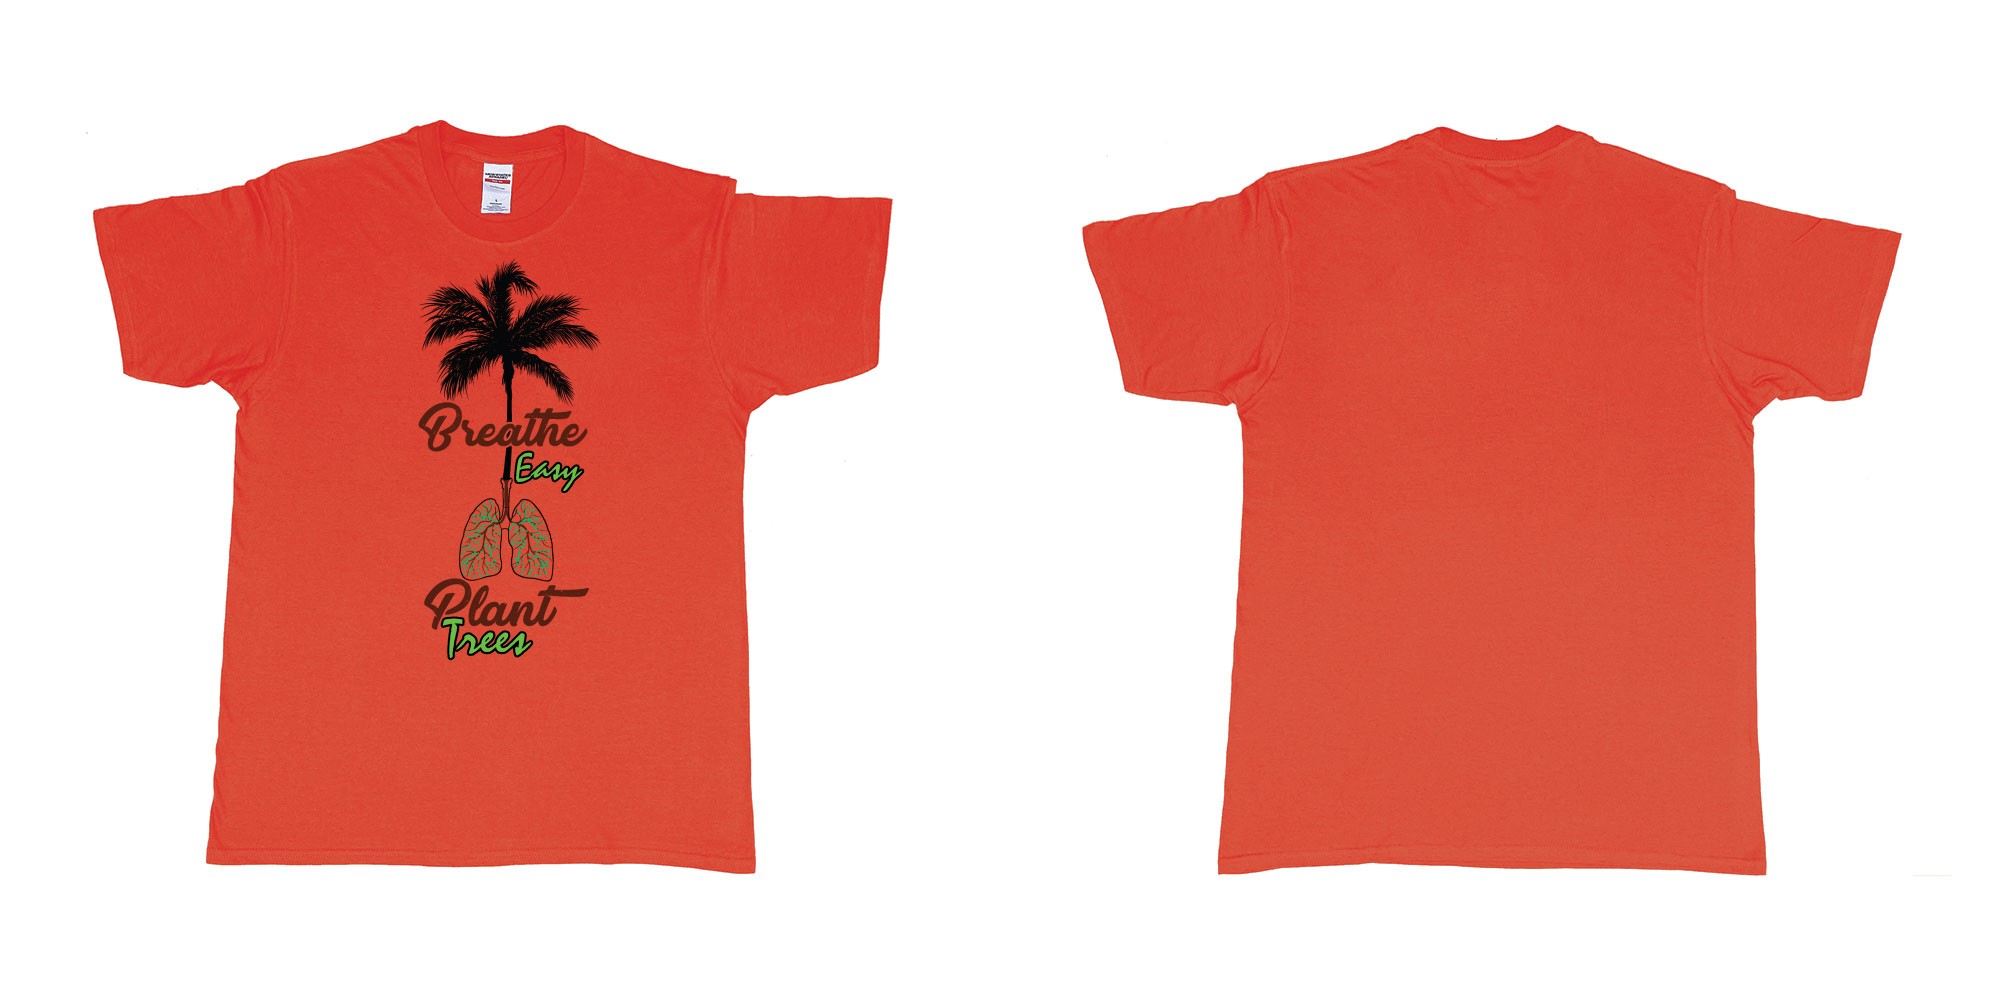 Custom tshirt design breathe easy and plant a tree for better air for everyone in fabric color red choice your own text made in Bali by The Pirate Way